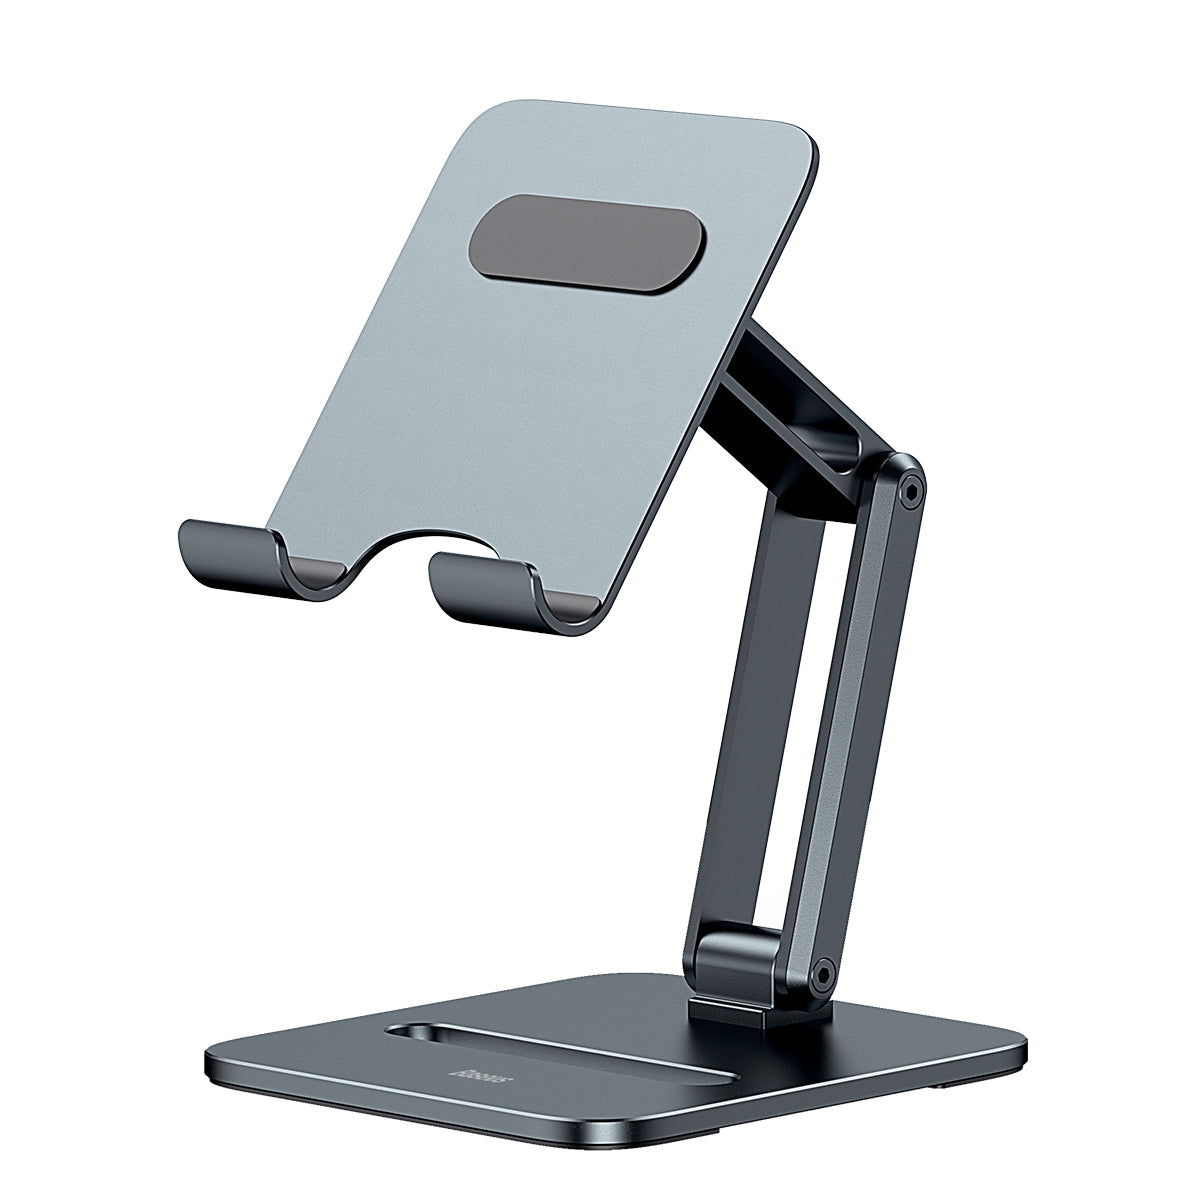 Baseus Desktop Biaxial Foldable and Adjustable Metal Stand for Tablets